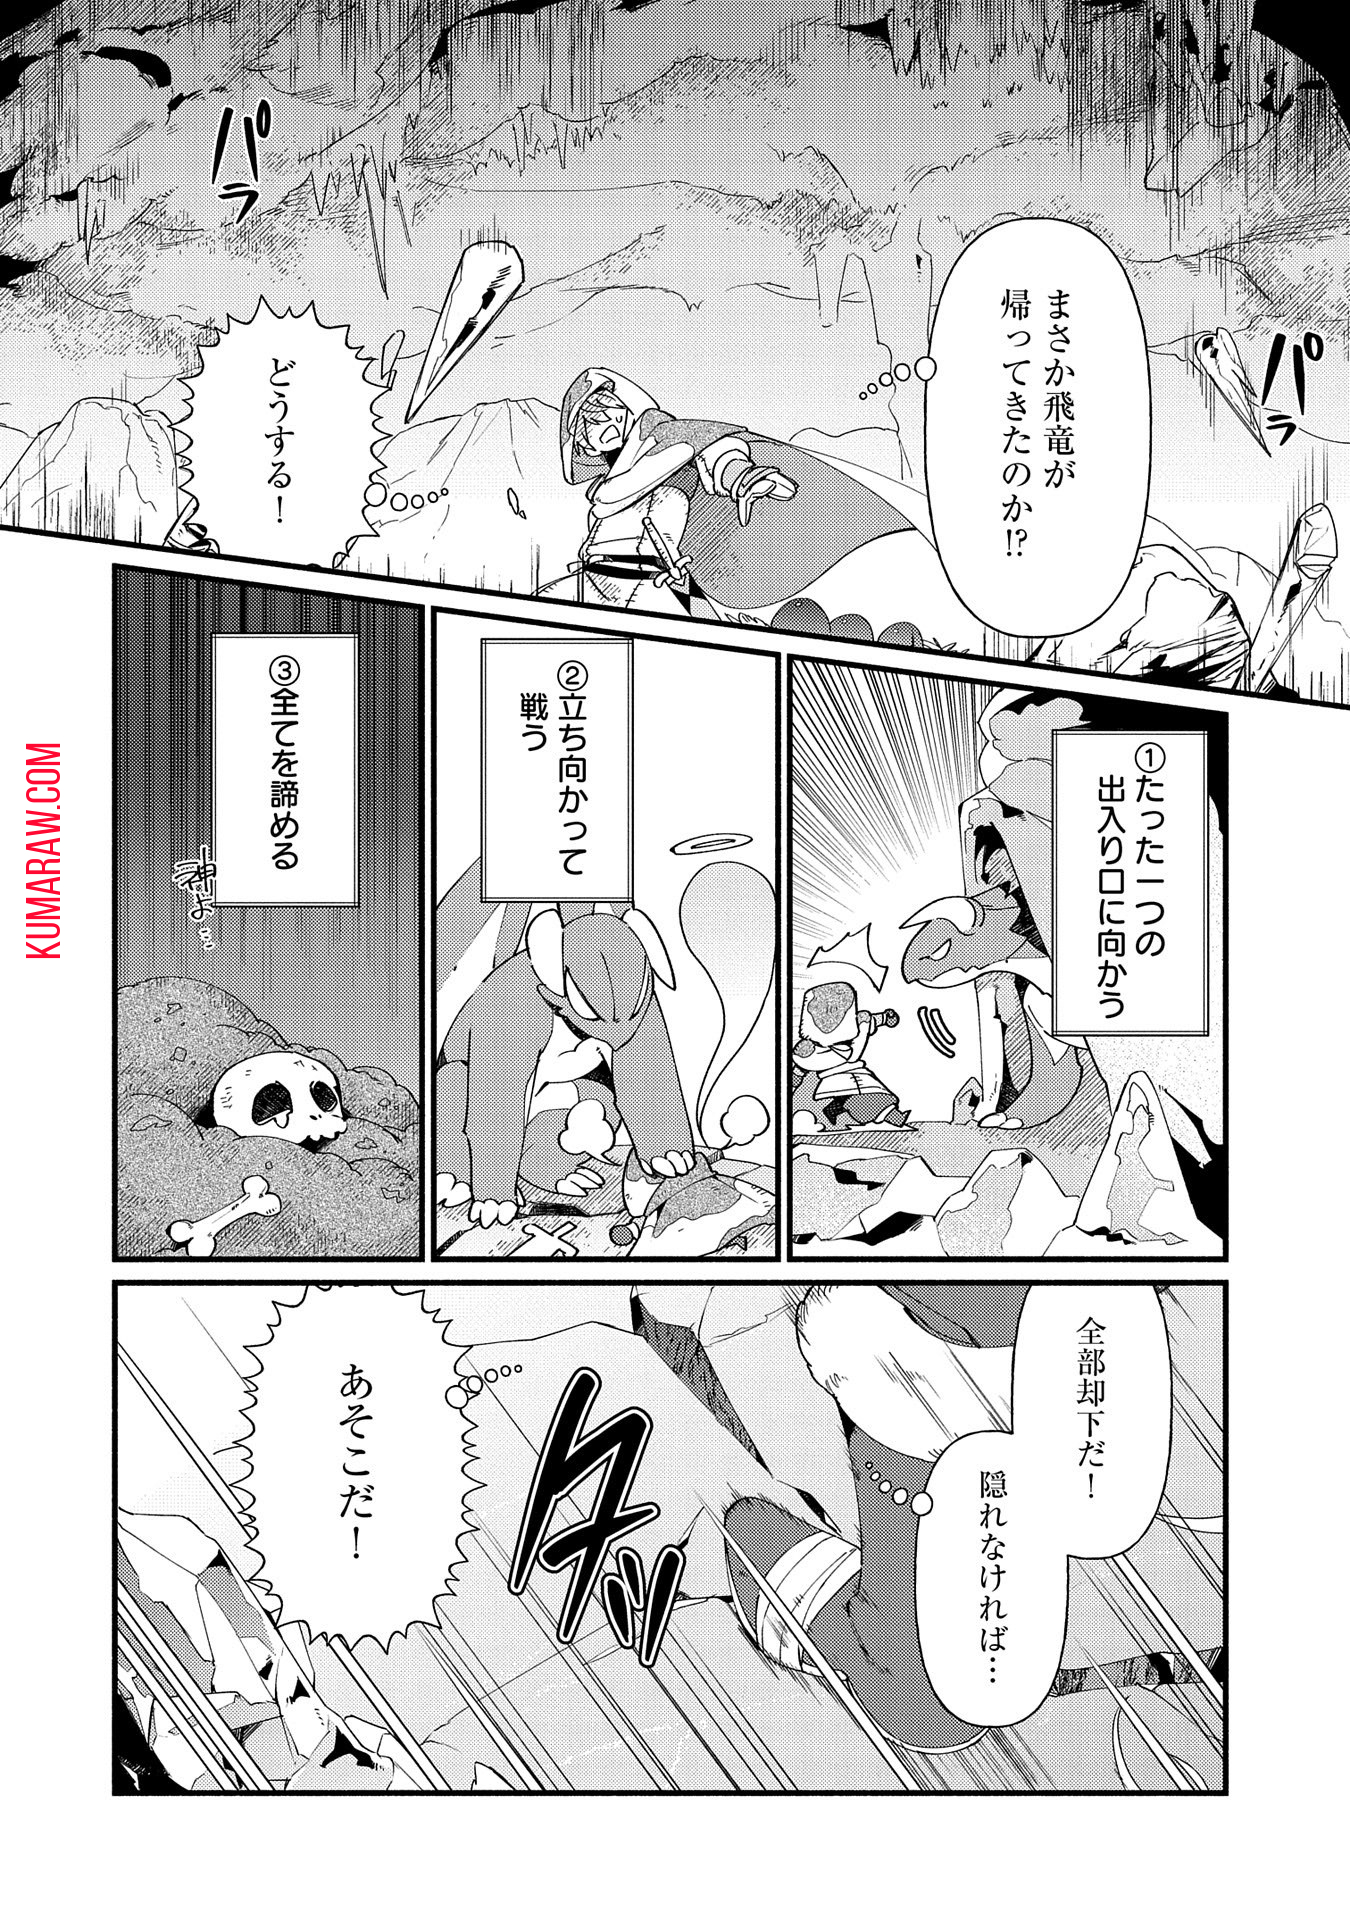 Nord’s Adventure 第11.1話 - Page 2